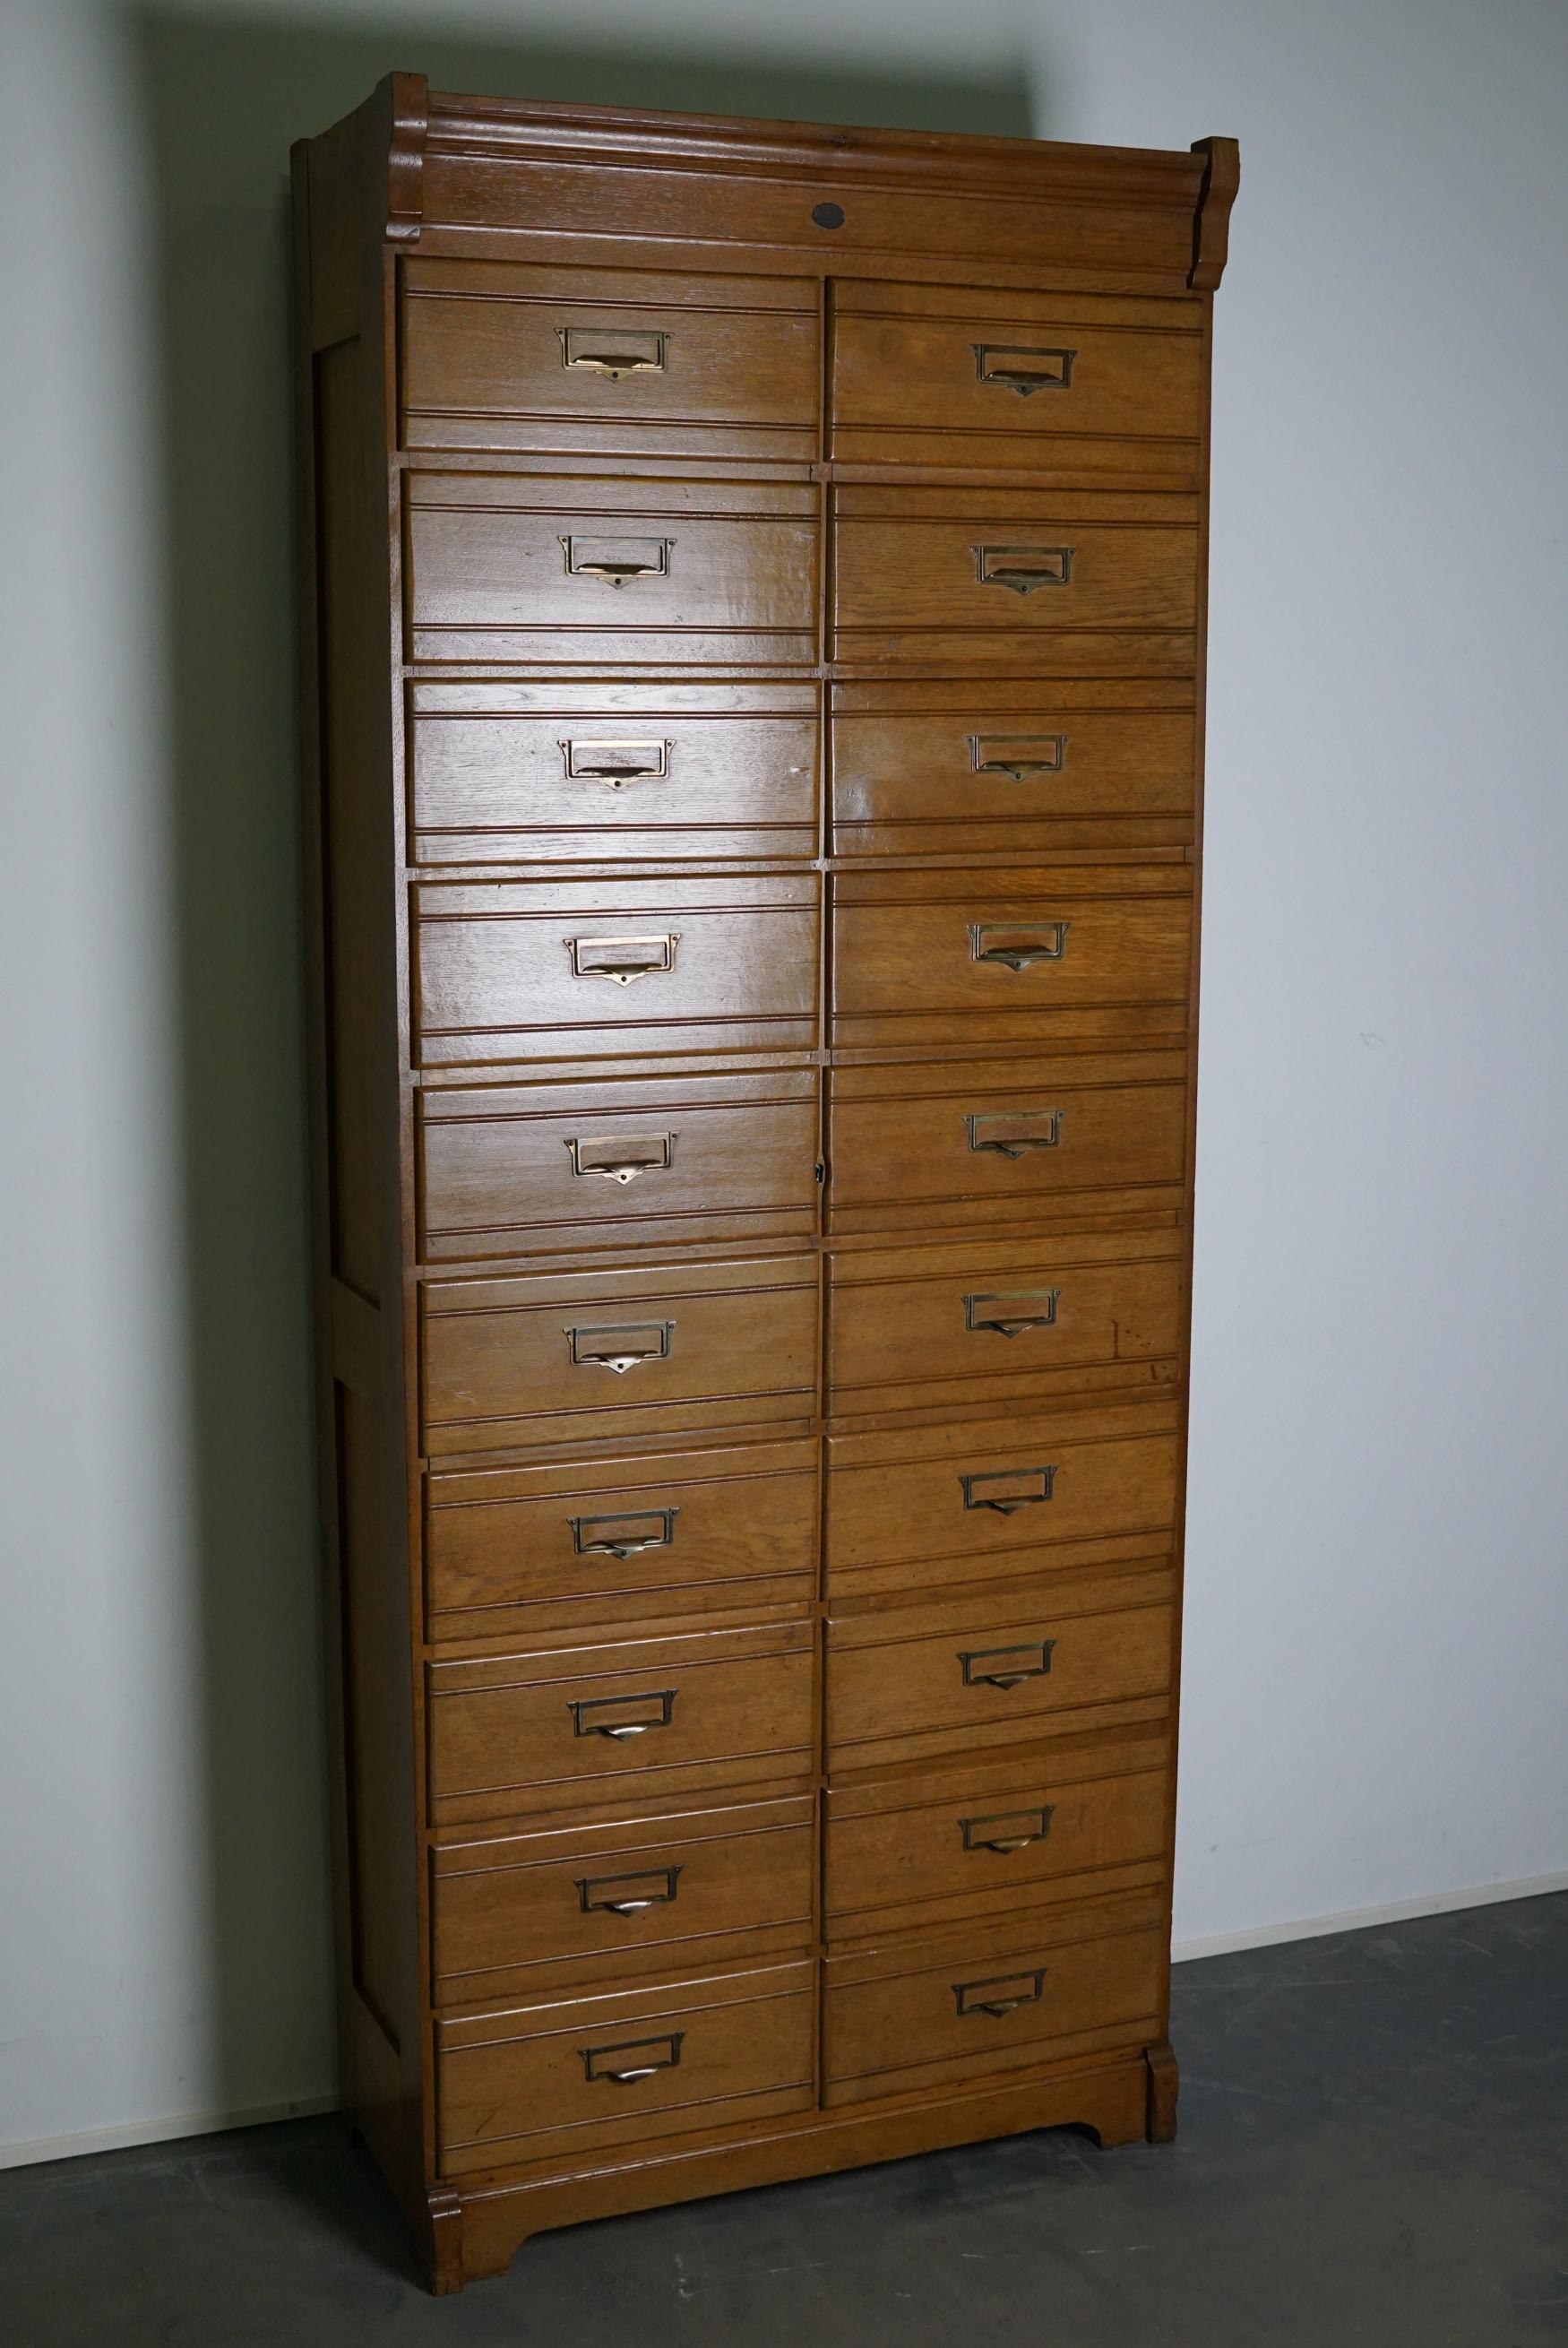 Luxembourgish Vintage Oak Apothecary / Filing Cabinet, Luxembourg, 1930s